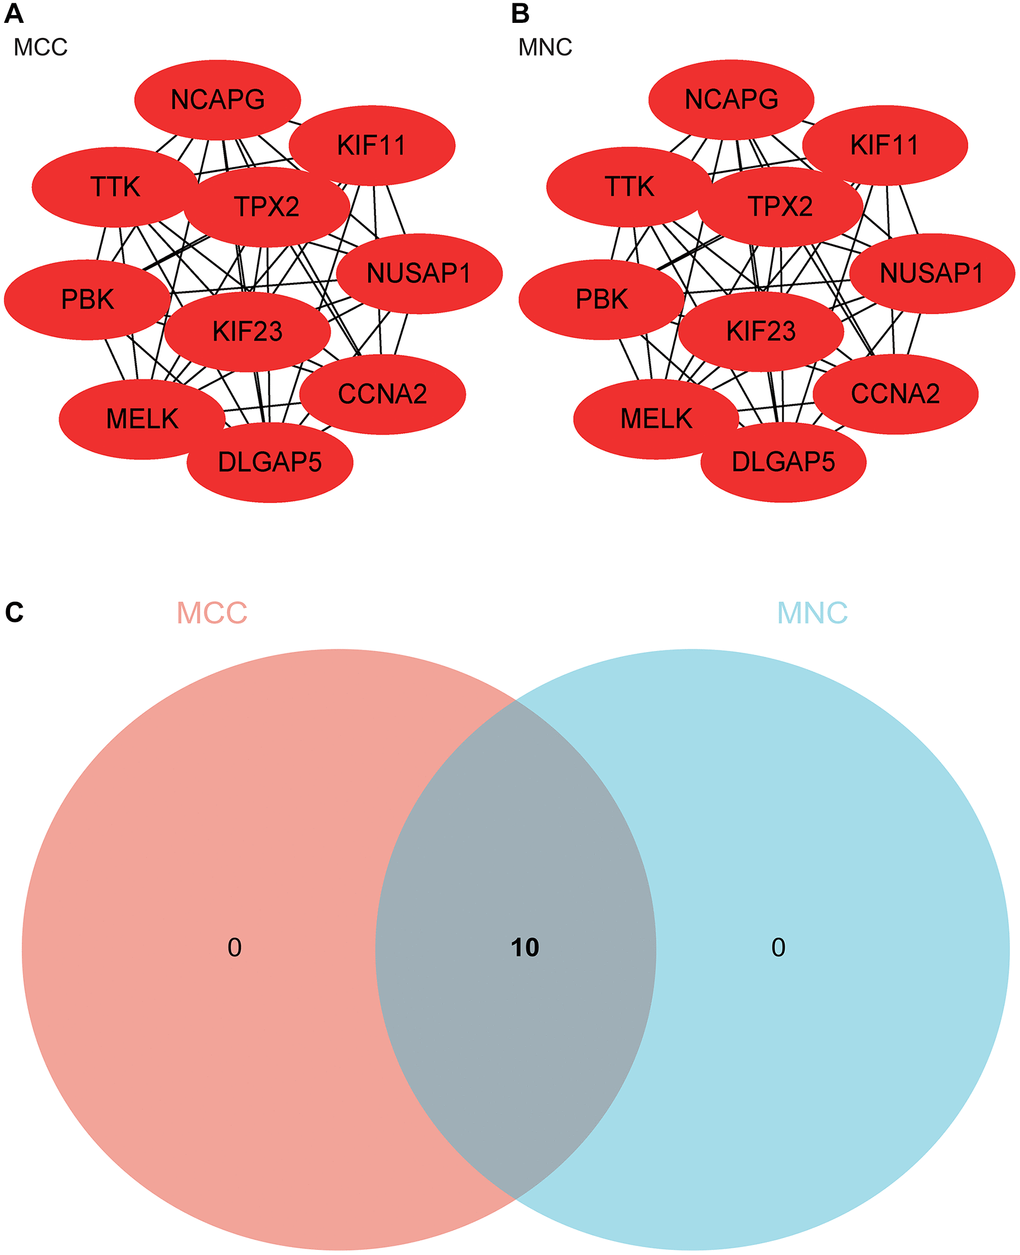 Construction and analysis of protein-protein interaction (PPI) network. (A) MCC was used to identify central genes (B) MNC was used to identify central genes. (C) Venn diagram is drawn and intersected.